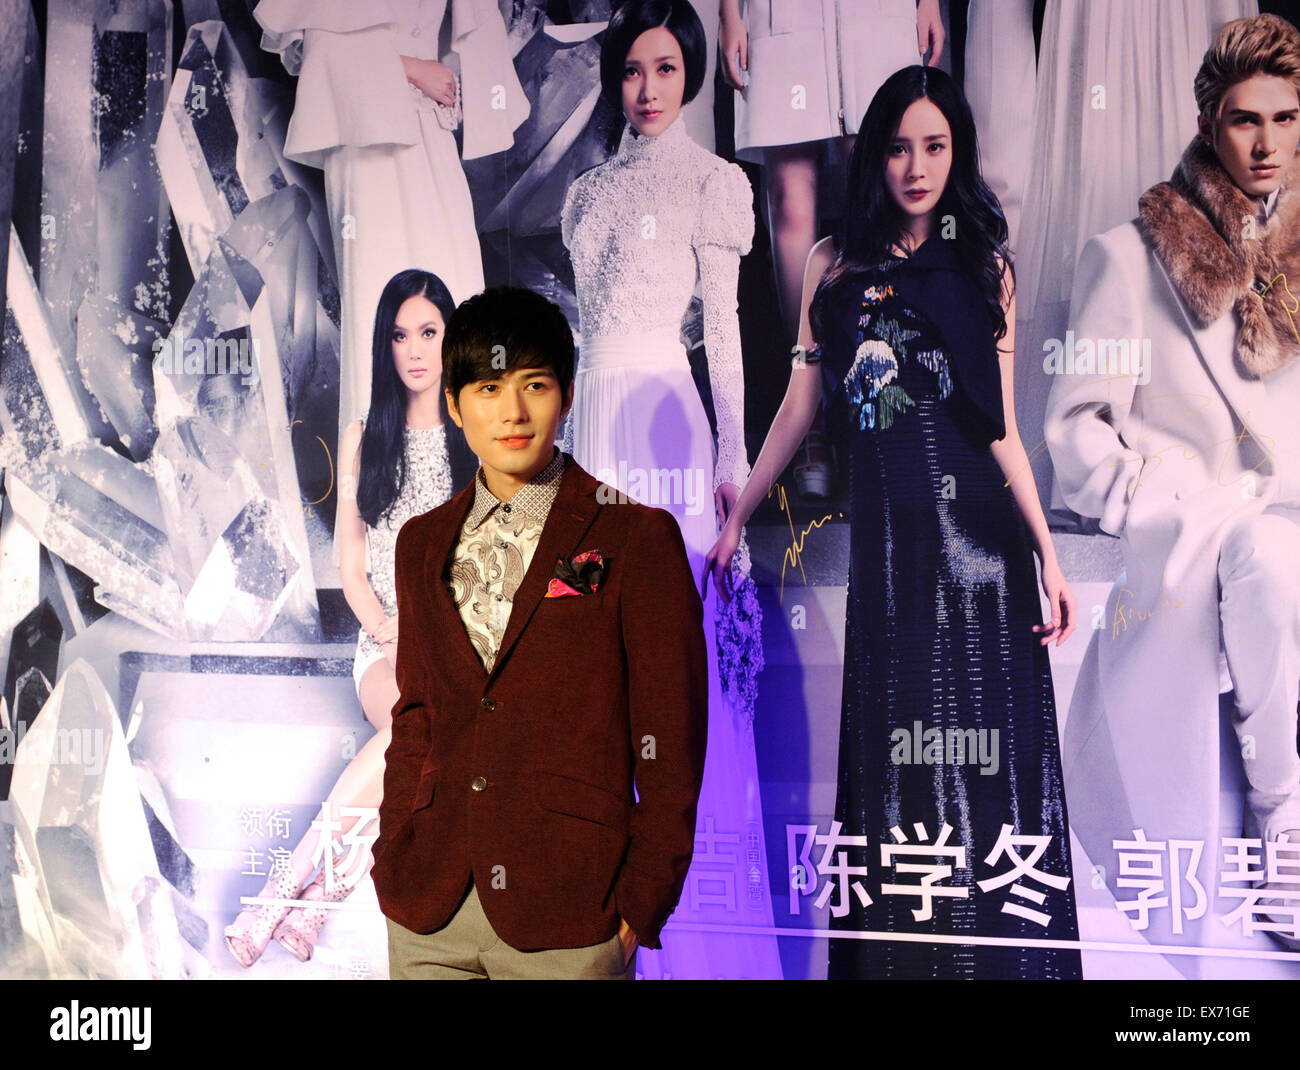 (150708) -- BEIJING, July 8, 2015 (Xinhua) -- Actor Chen Xuedong poses during a premiere ceremony of the film 'Tiny Time 4.0' in Beijing, capital of China, July 8, 2015. The film 'Tiny Time 4.0' will be screened on July 9.   (Xinhua/Xu Liang)(mcg) Stock Photo